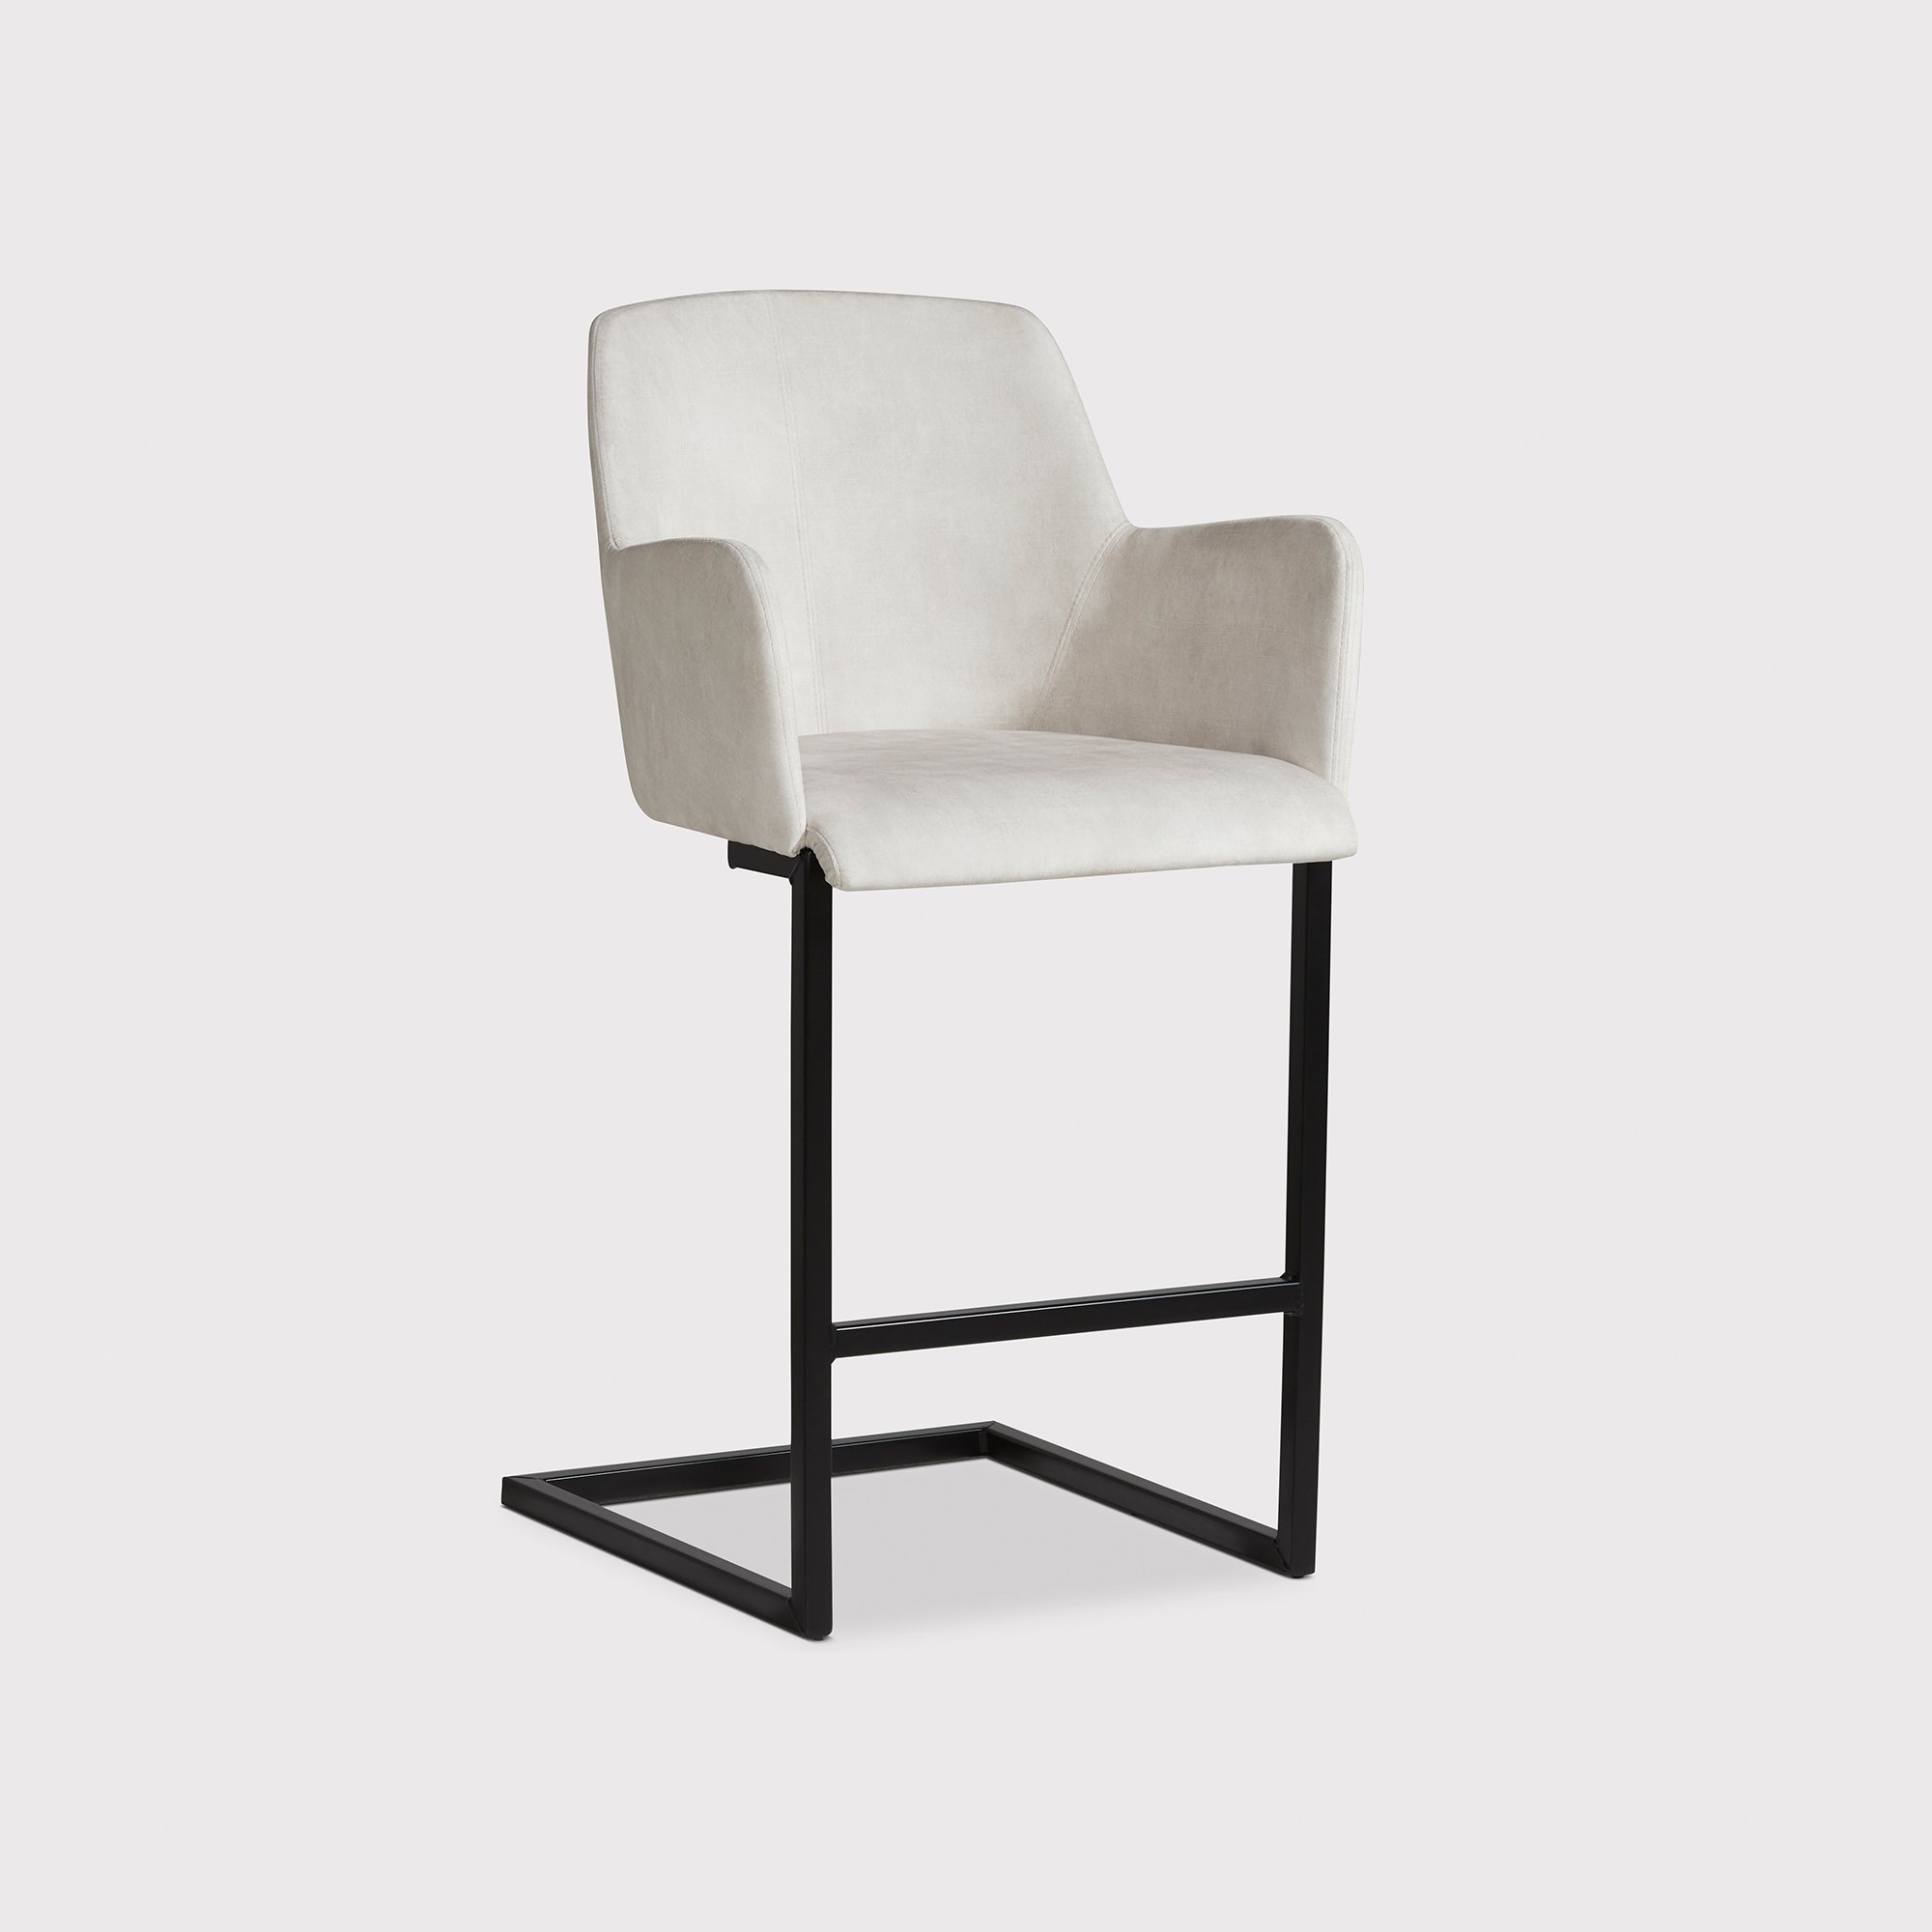 Pure Furniture Channing Counter Stool With Matt Black Frame, White | Barker & Stonehouse